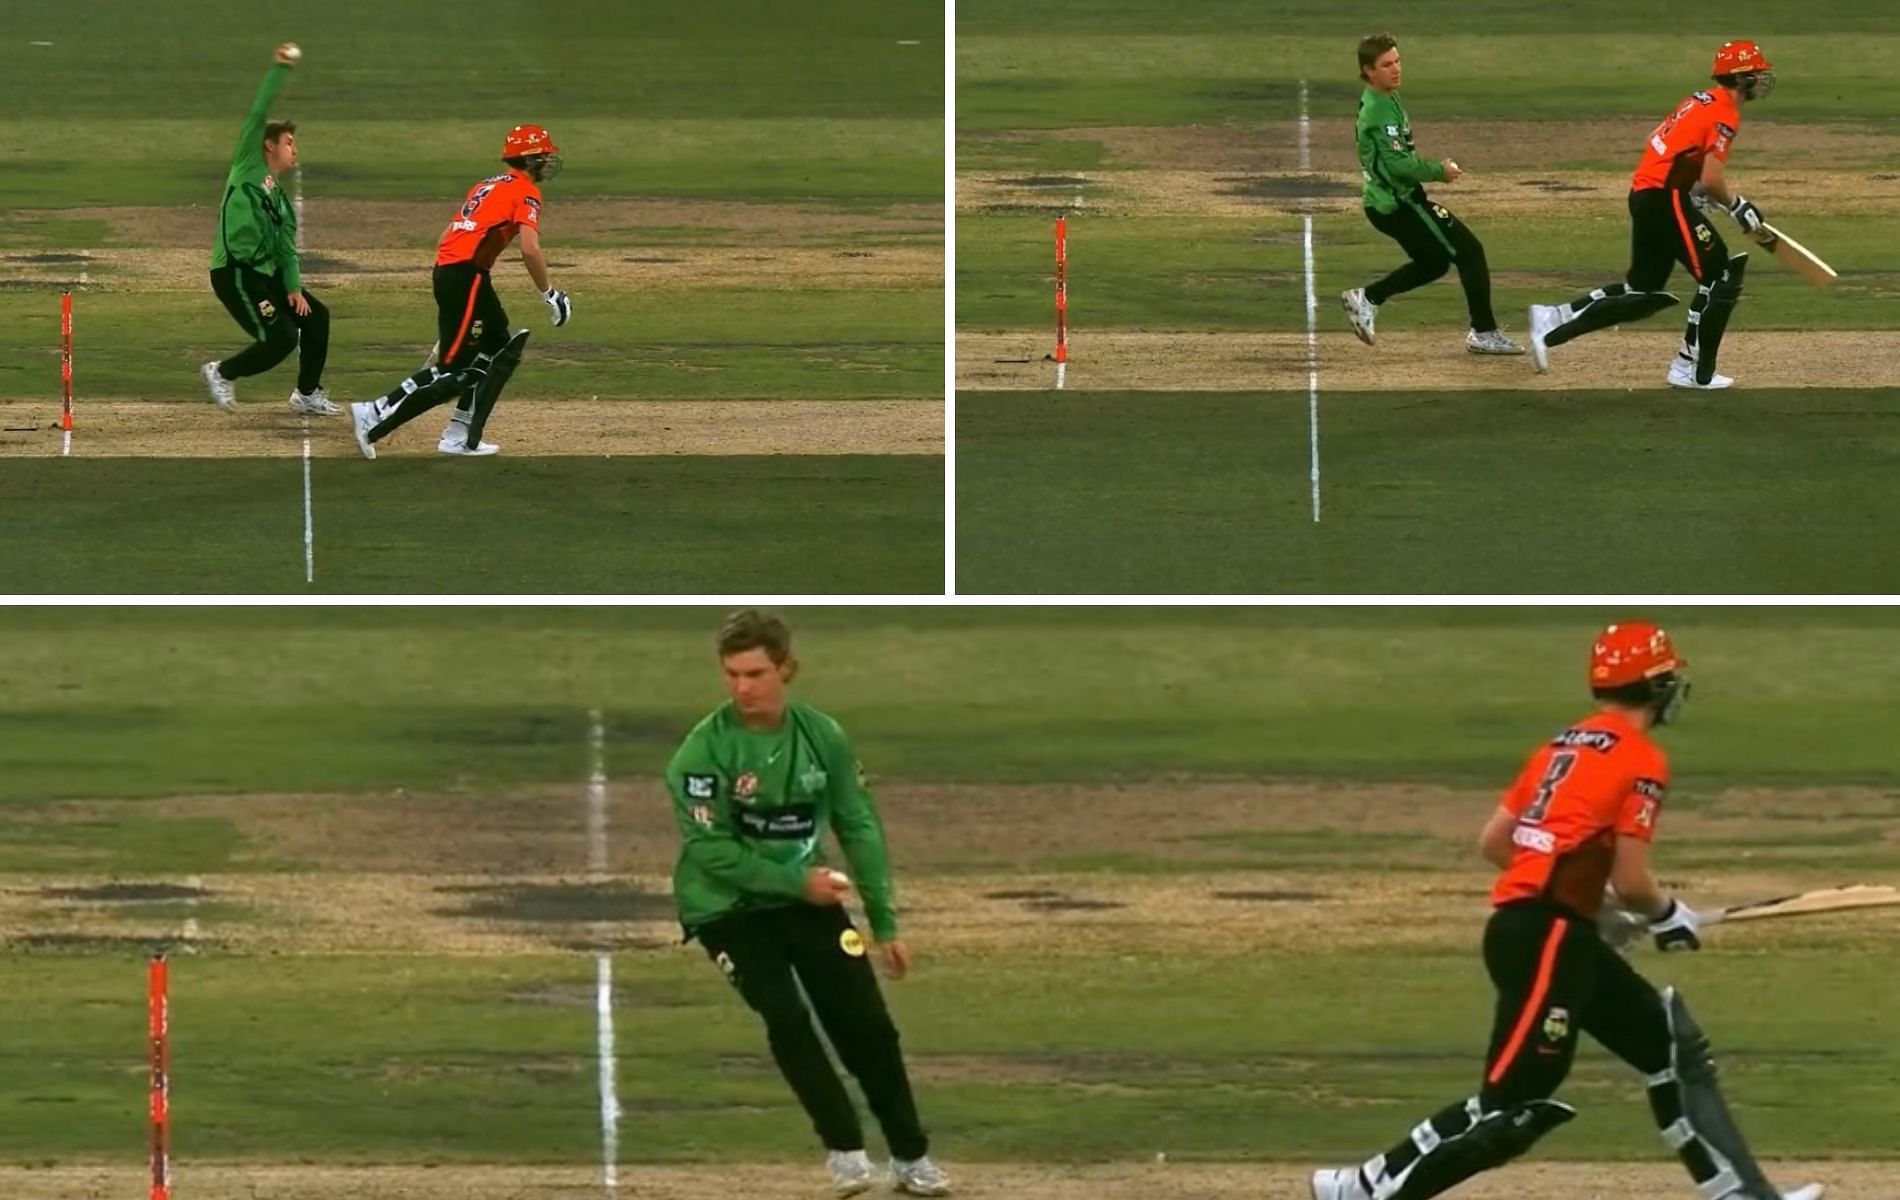 Adam Zampa had gone too far into his action before taking the bails off. (Pics: Twitter)